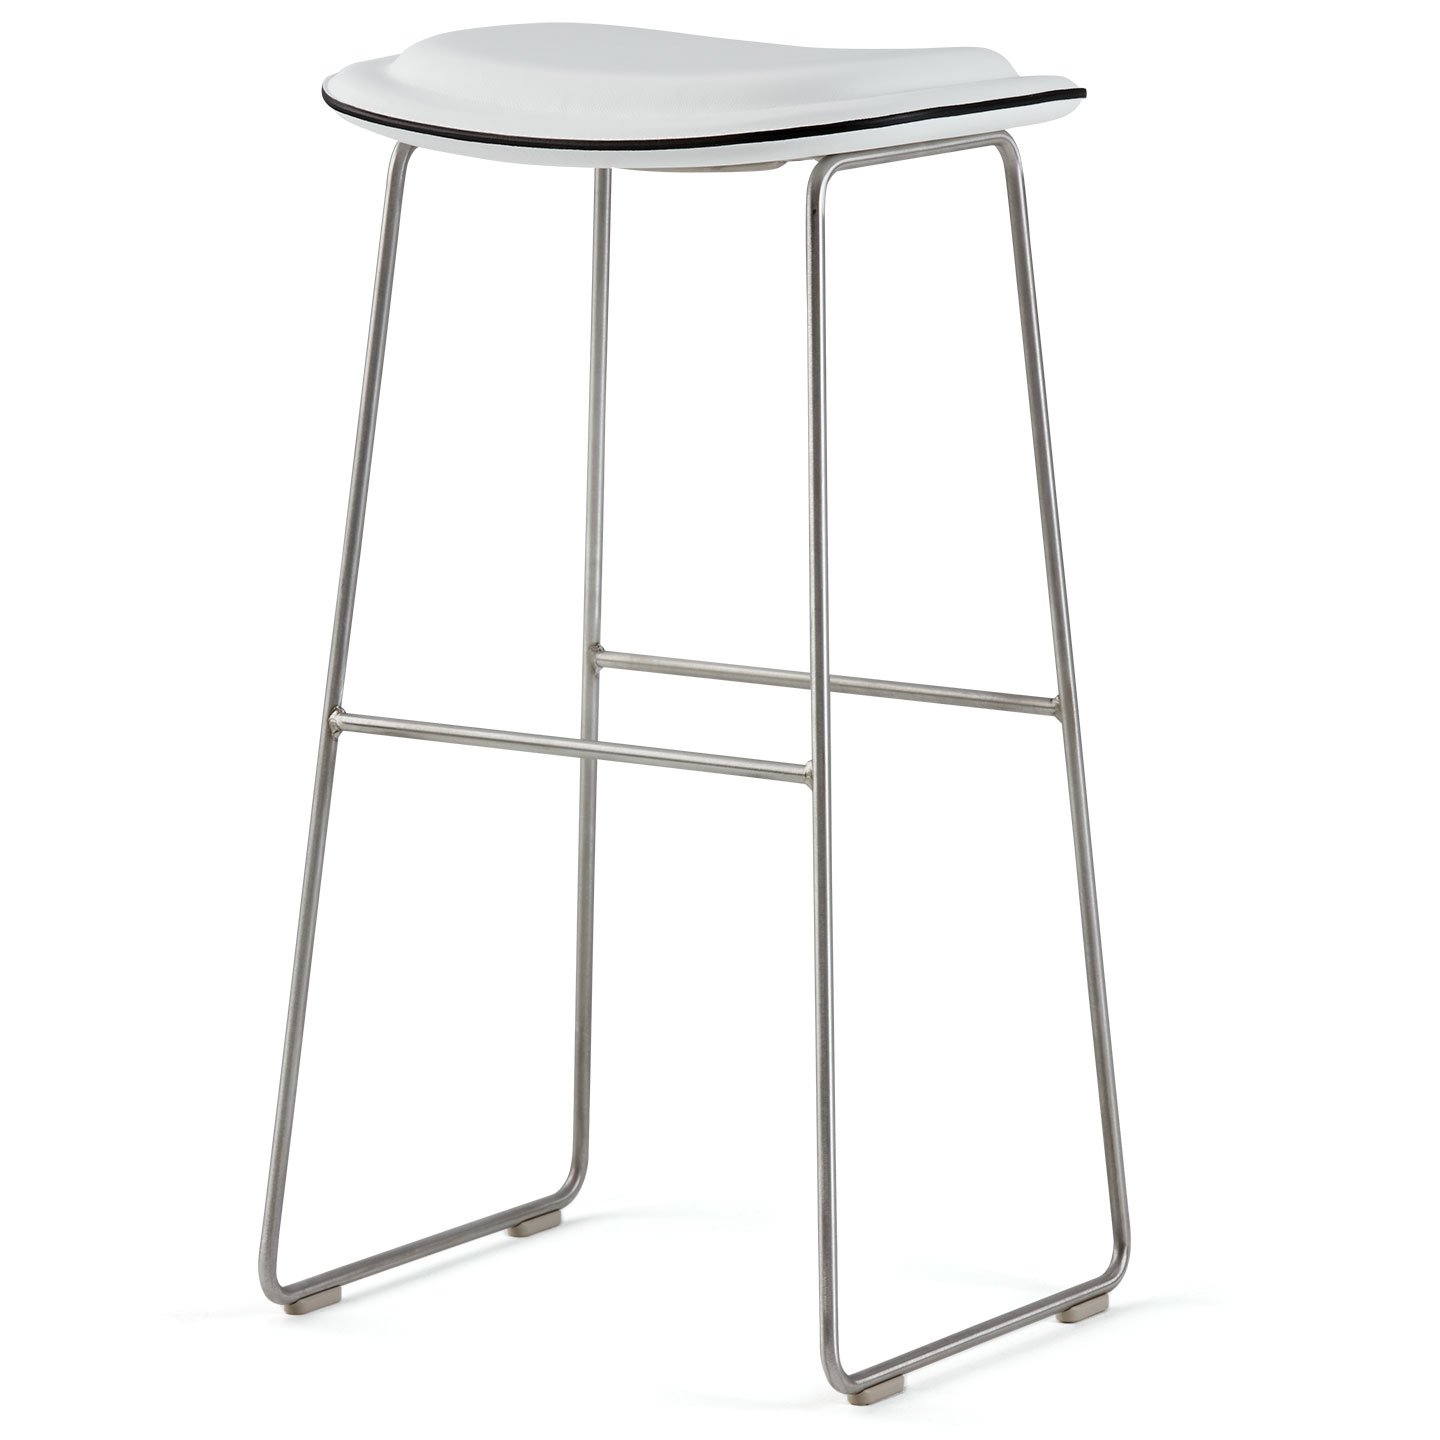 Haworth Hi-Pad stool with metal legs and white seat in a side view